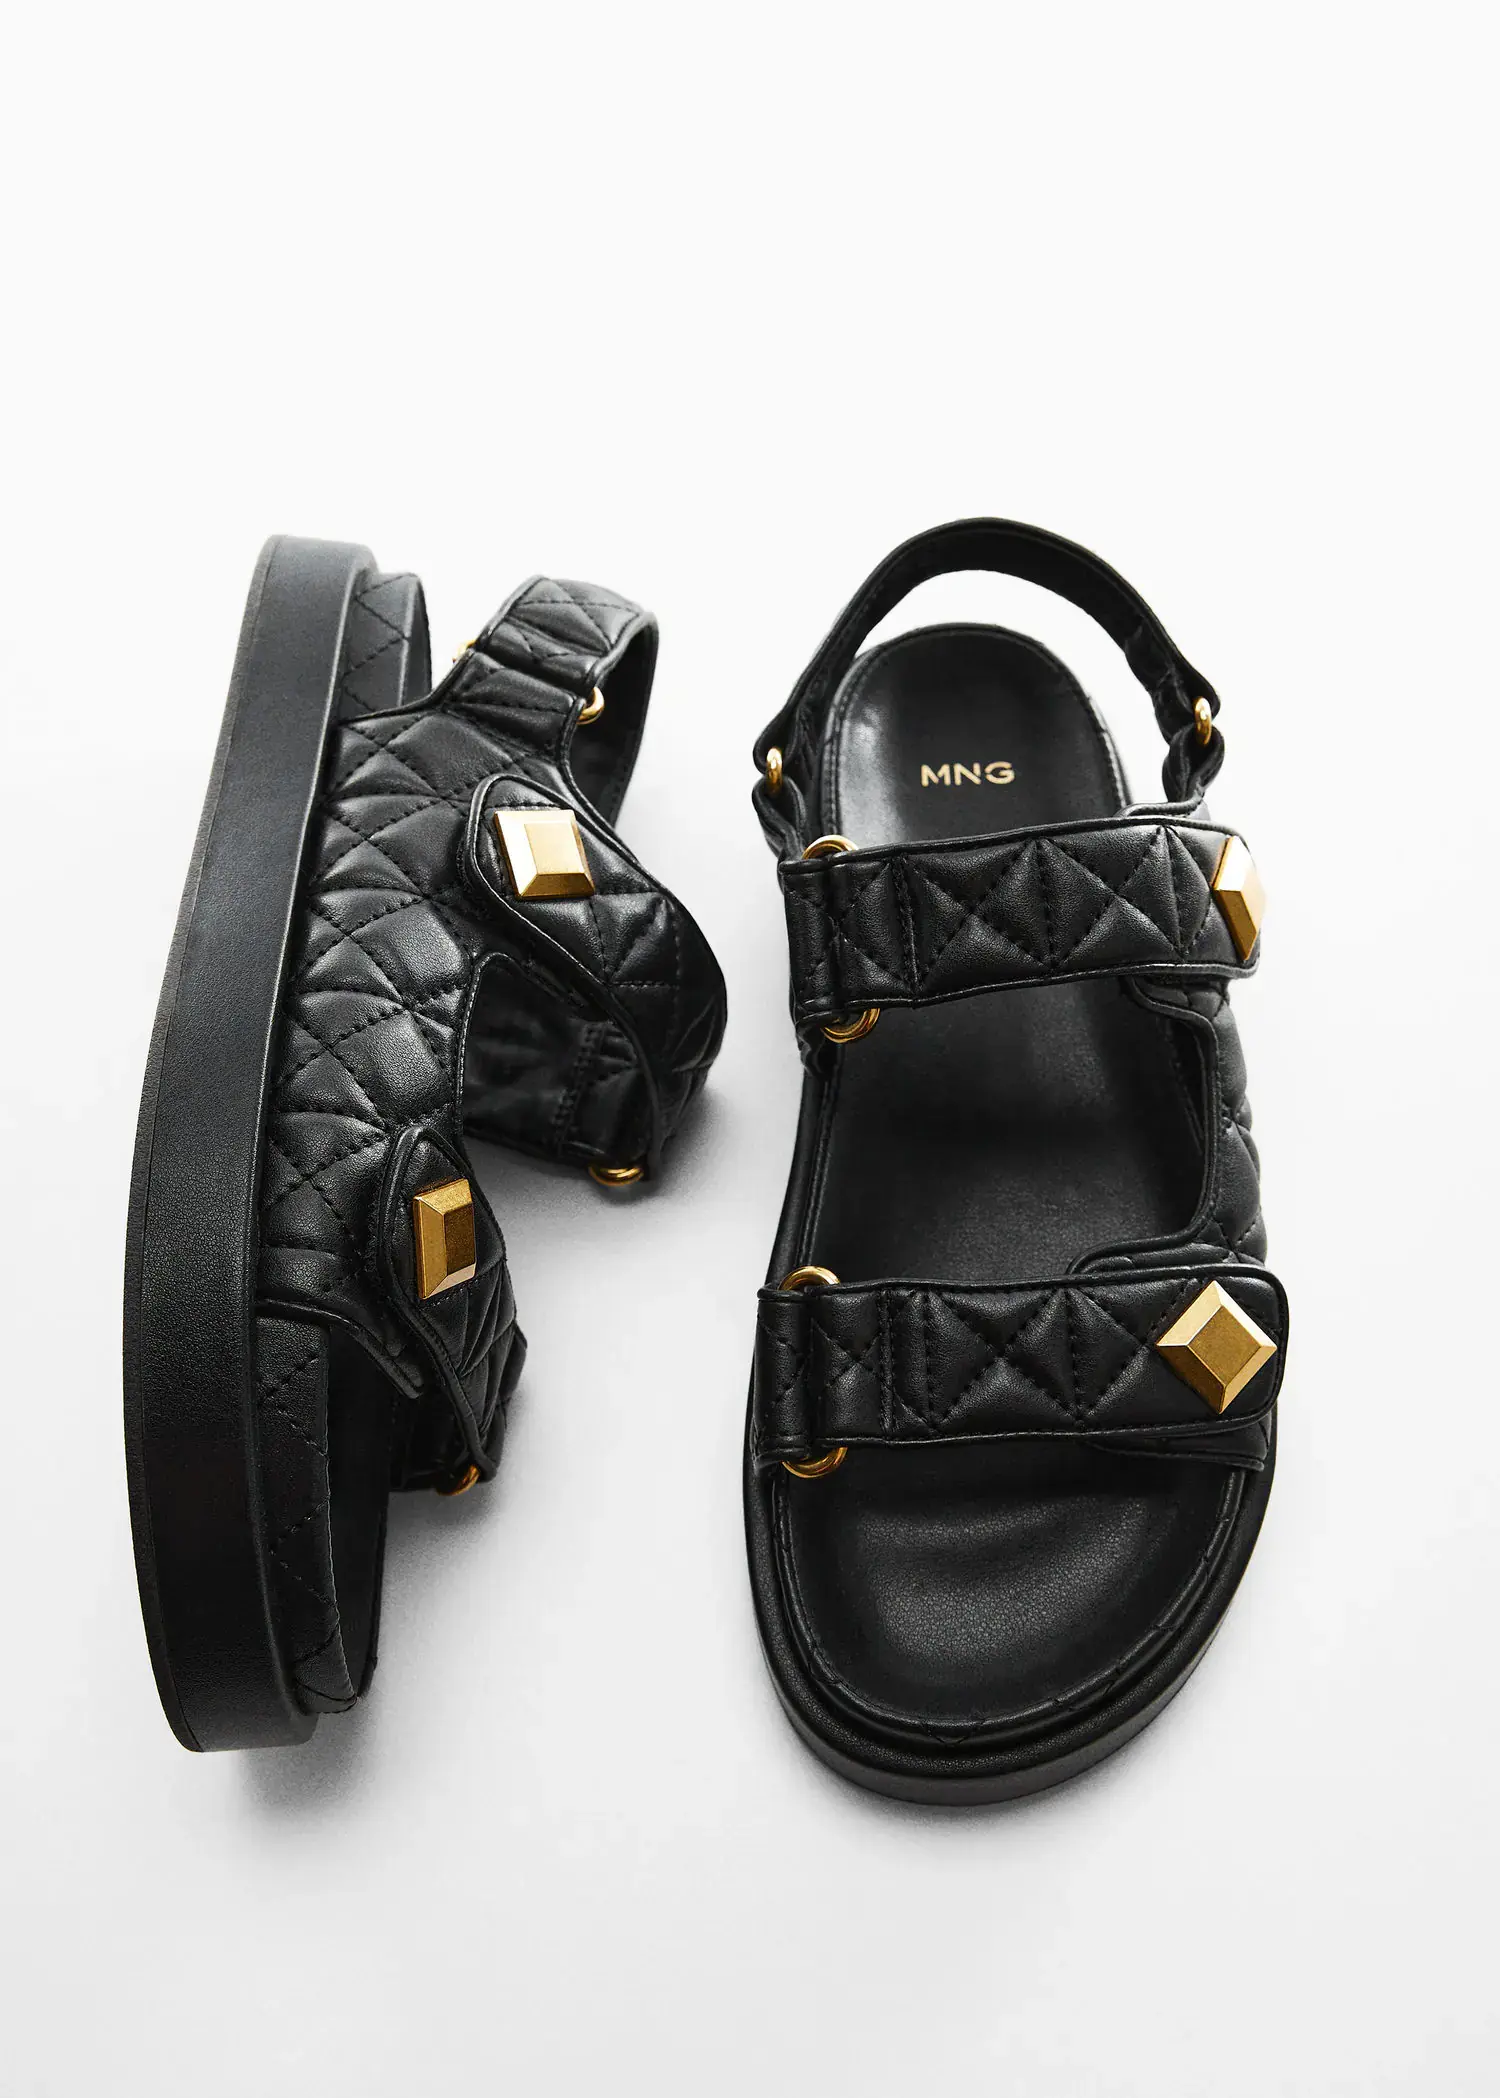 Mango Velcro padded sandal. a pair of black sandals with gold hardware. 